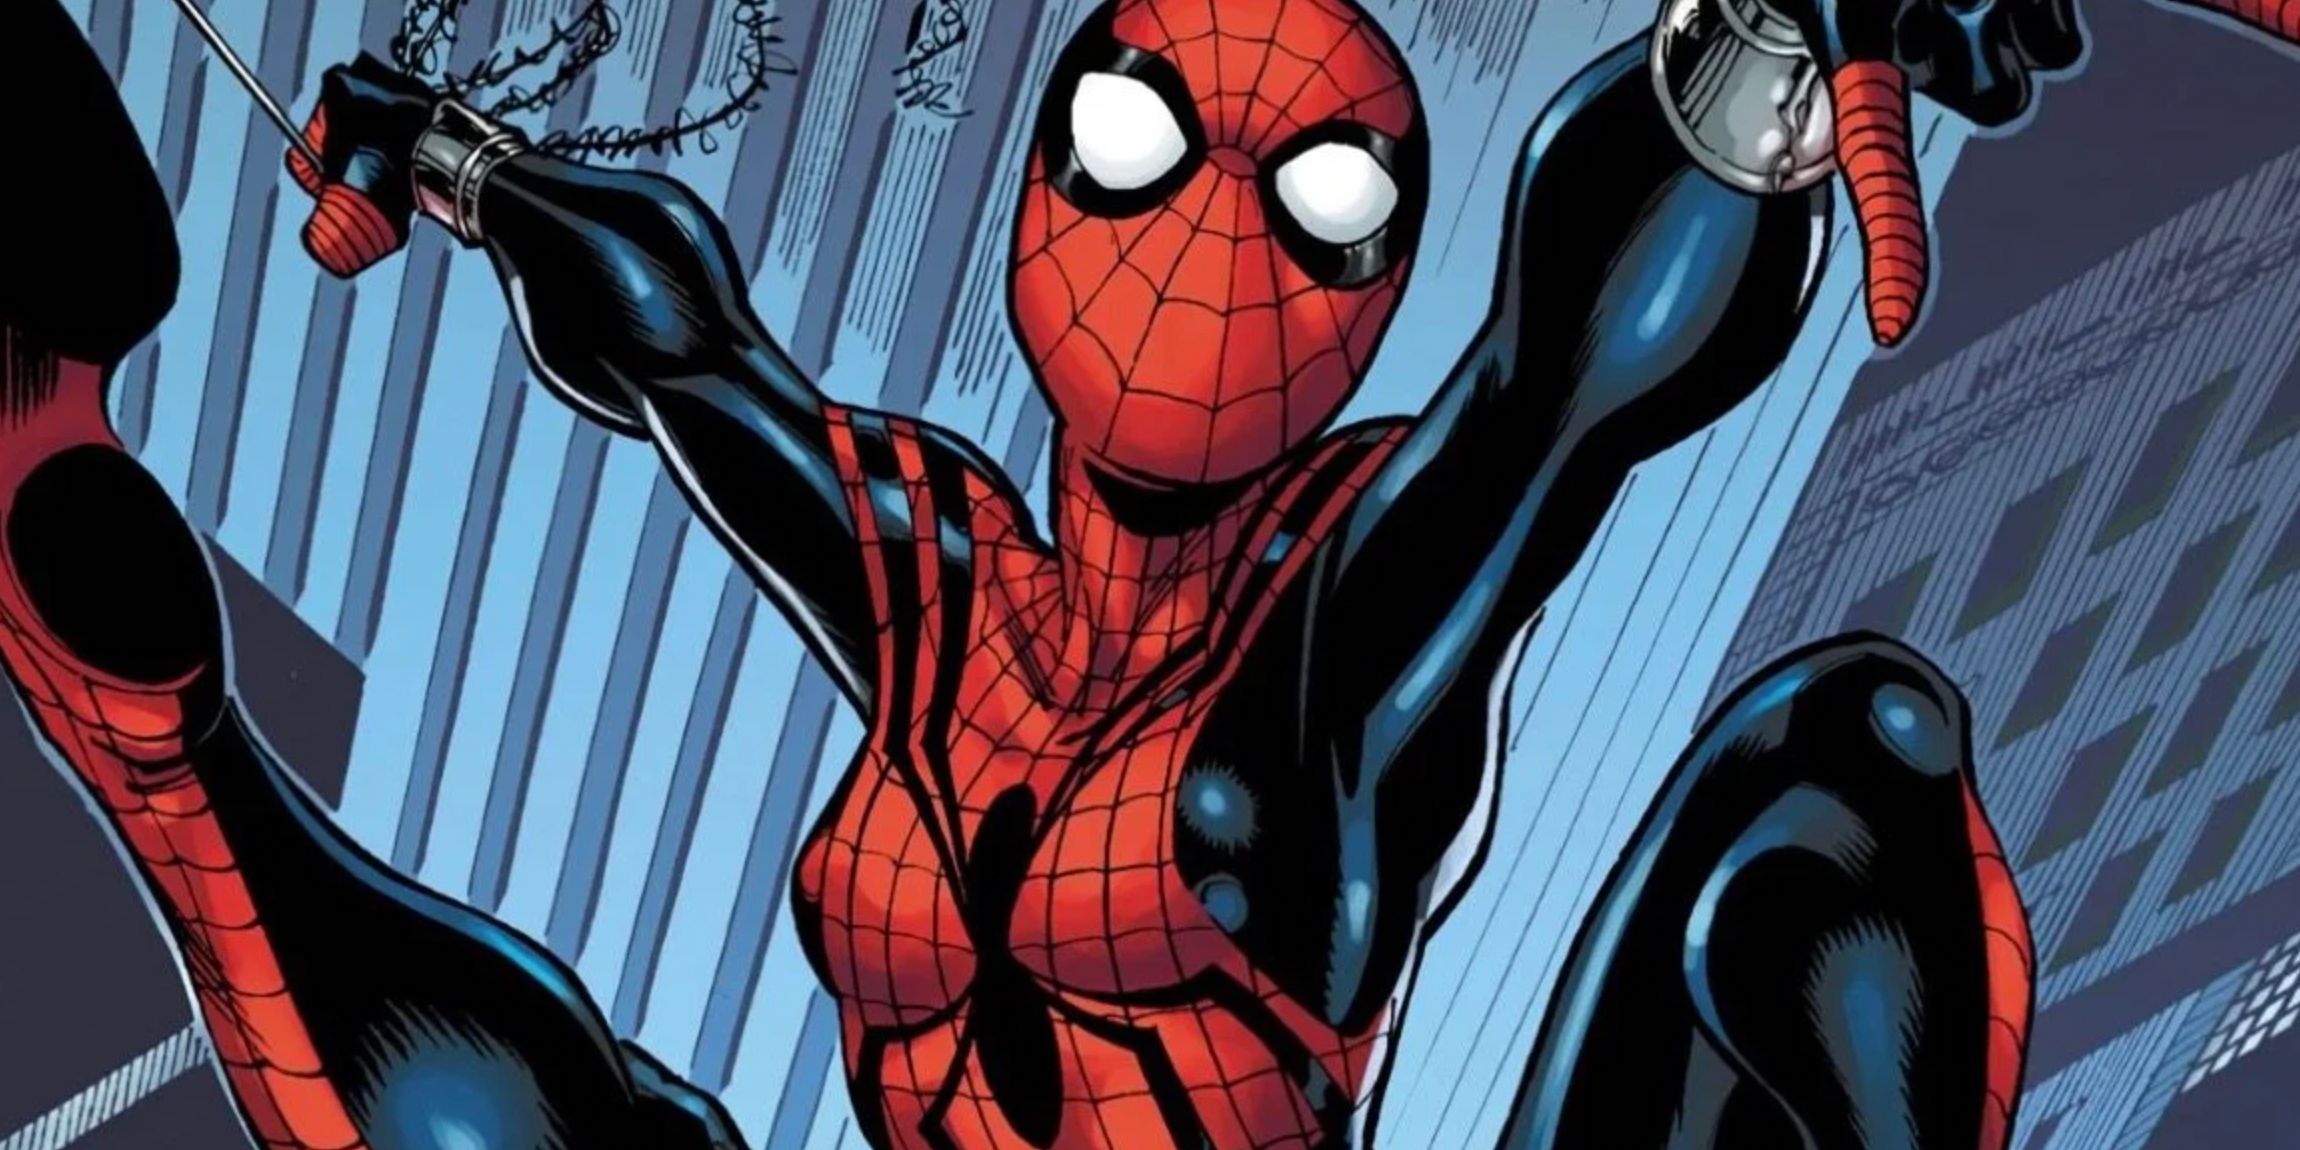 Mayday Parker swinging from her webs in Marvel comcis